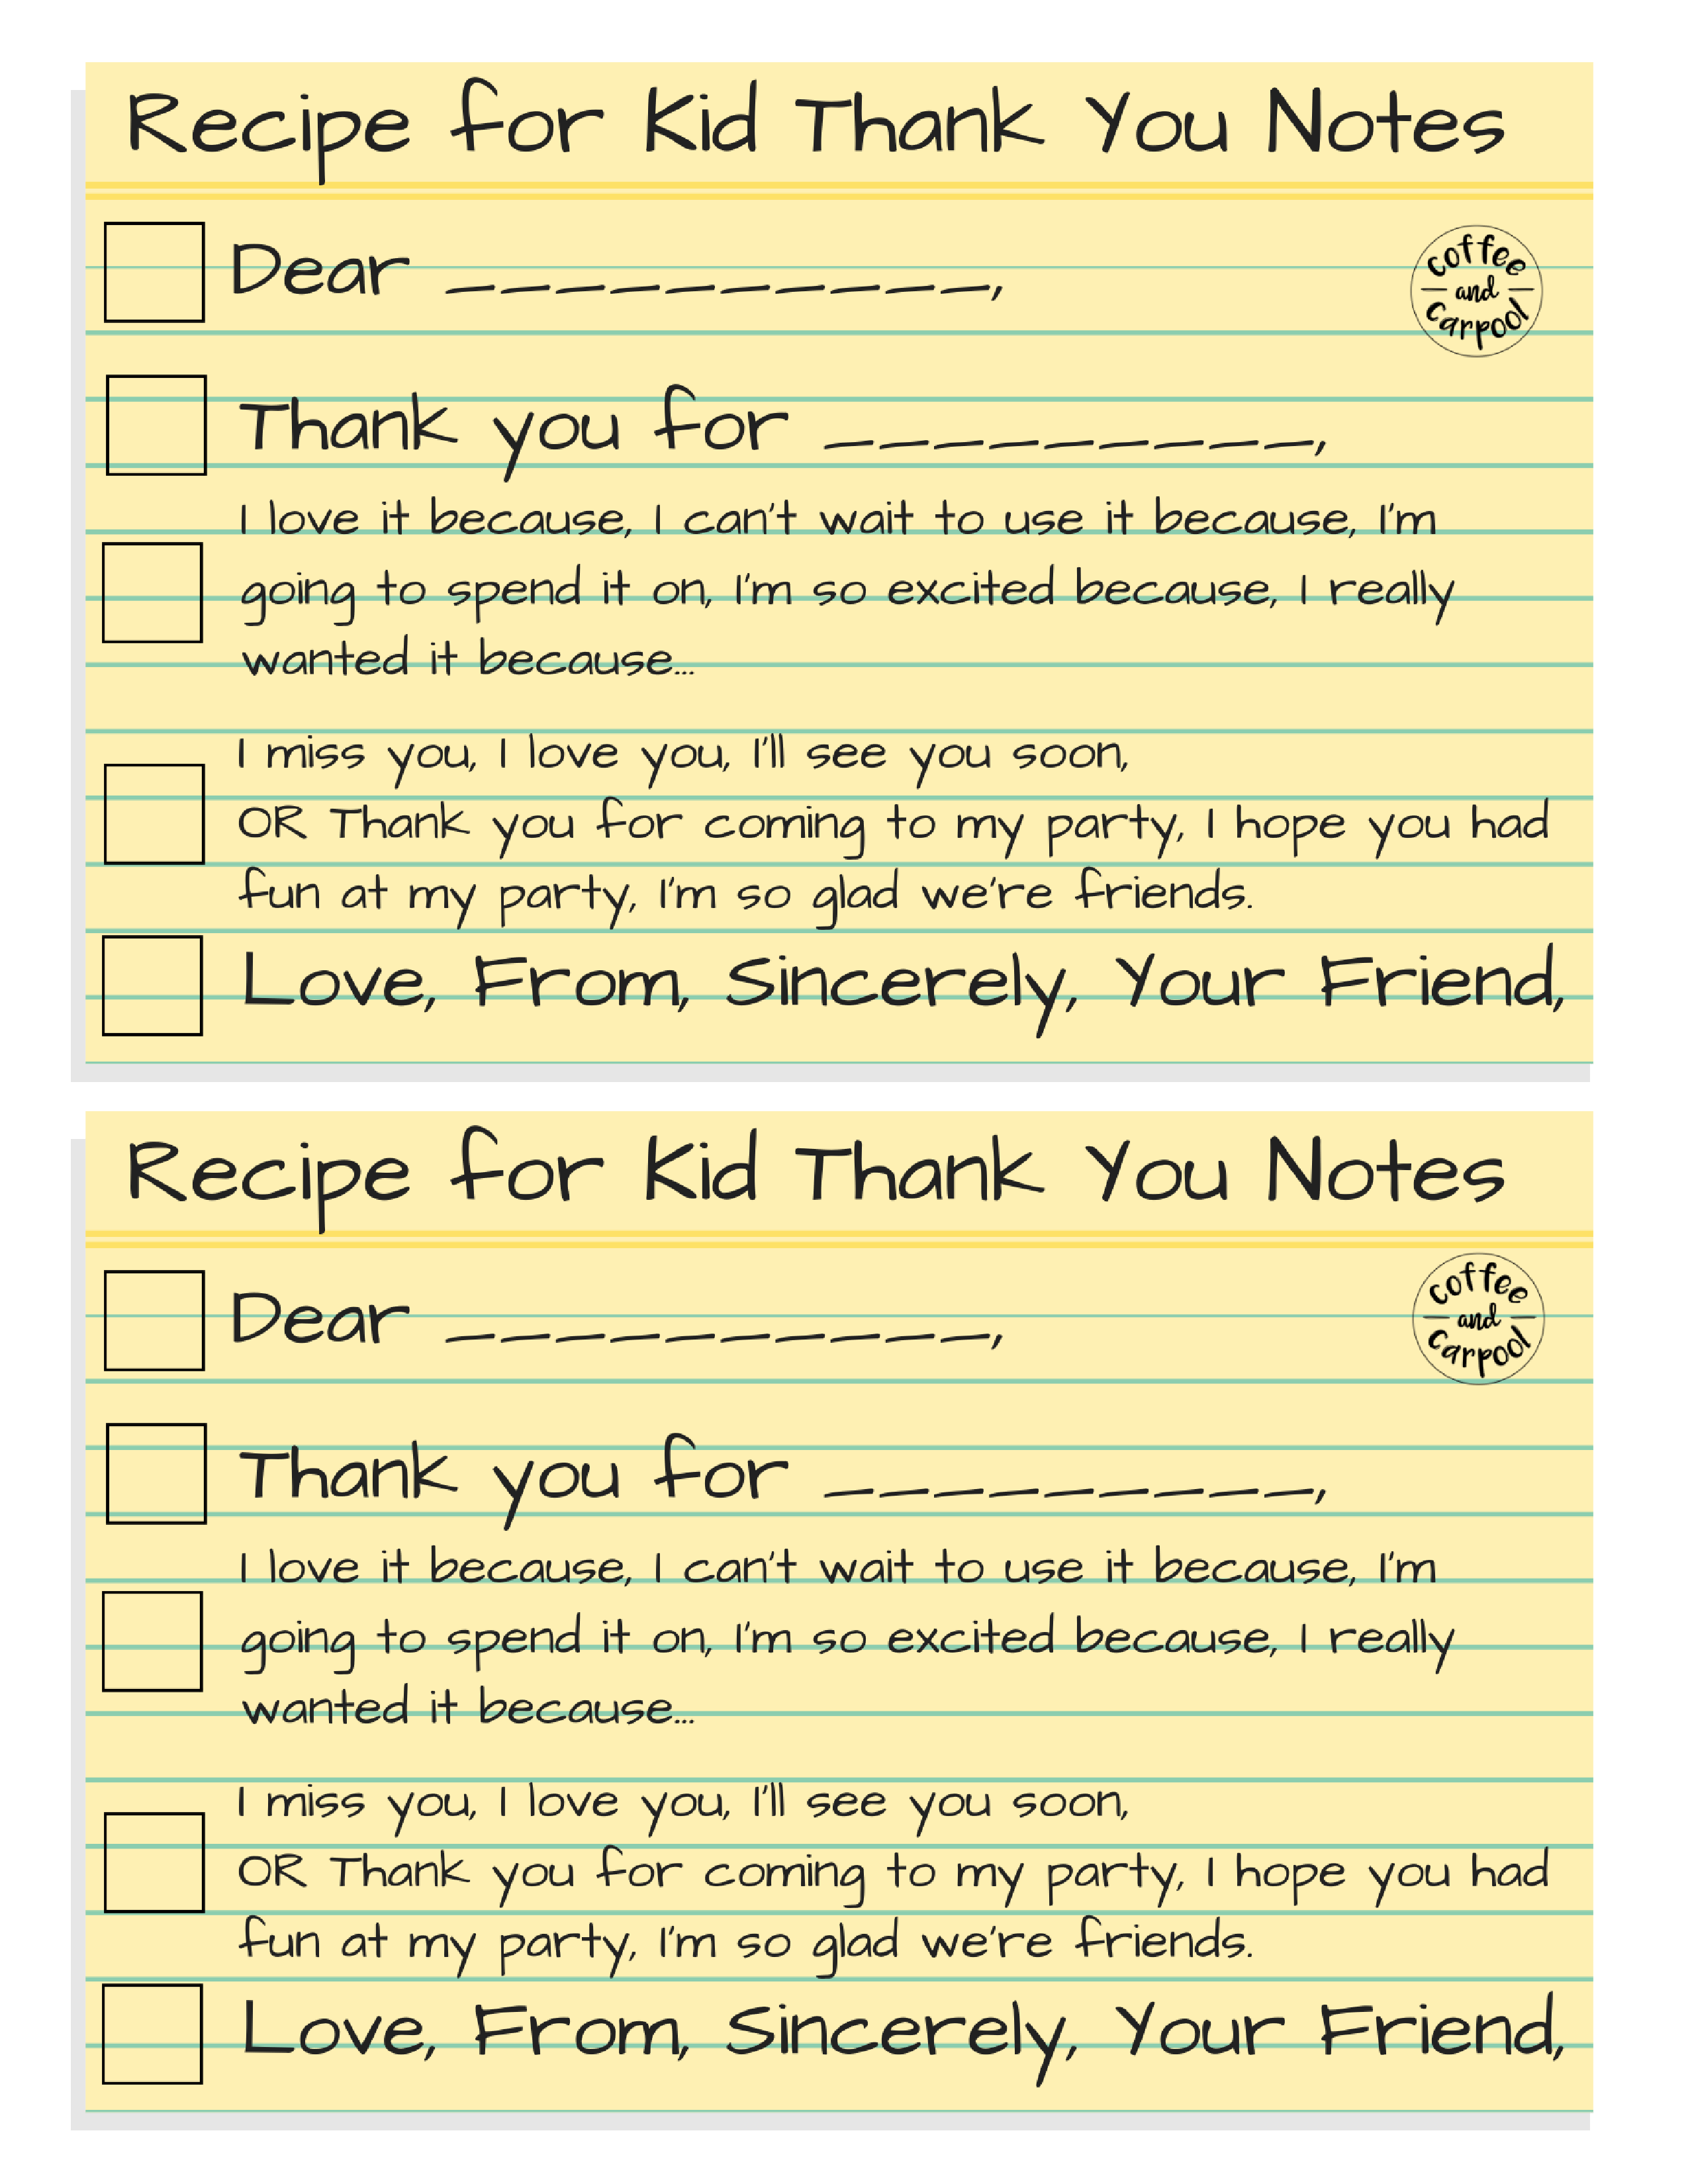 How to Write a Thoughtful Thank-You Note